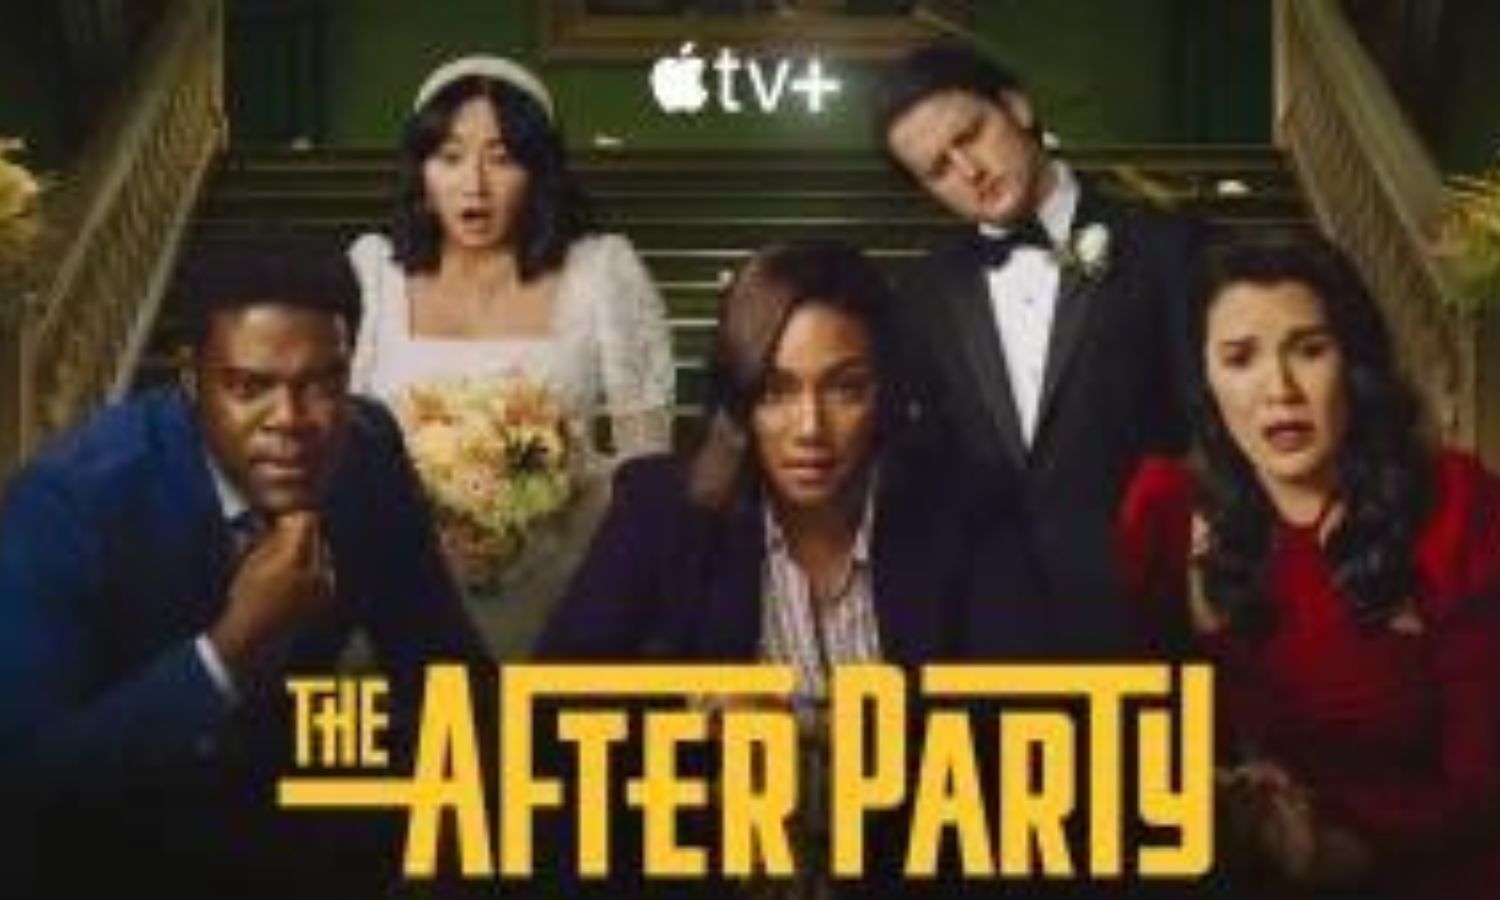 The Afterparty Season 2 Episode 6 release date